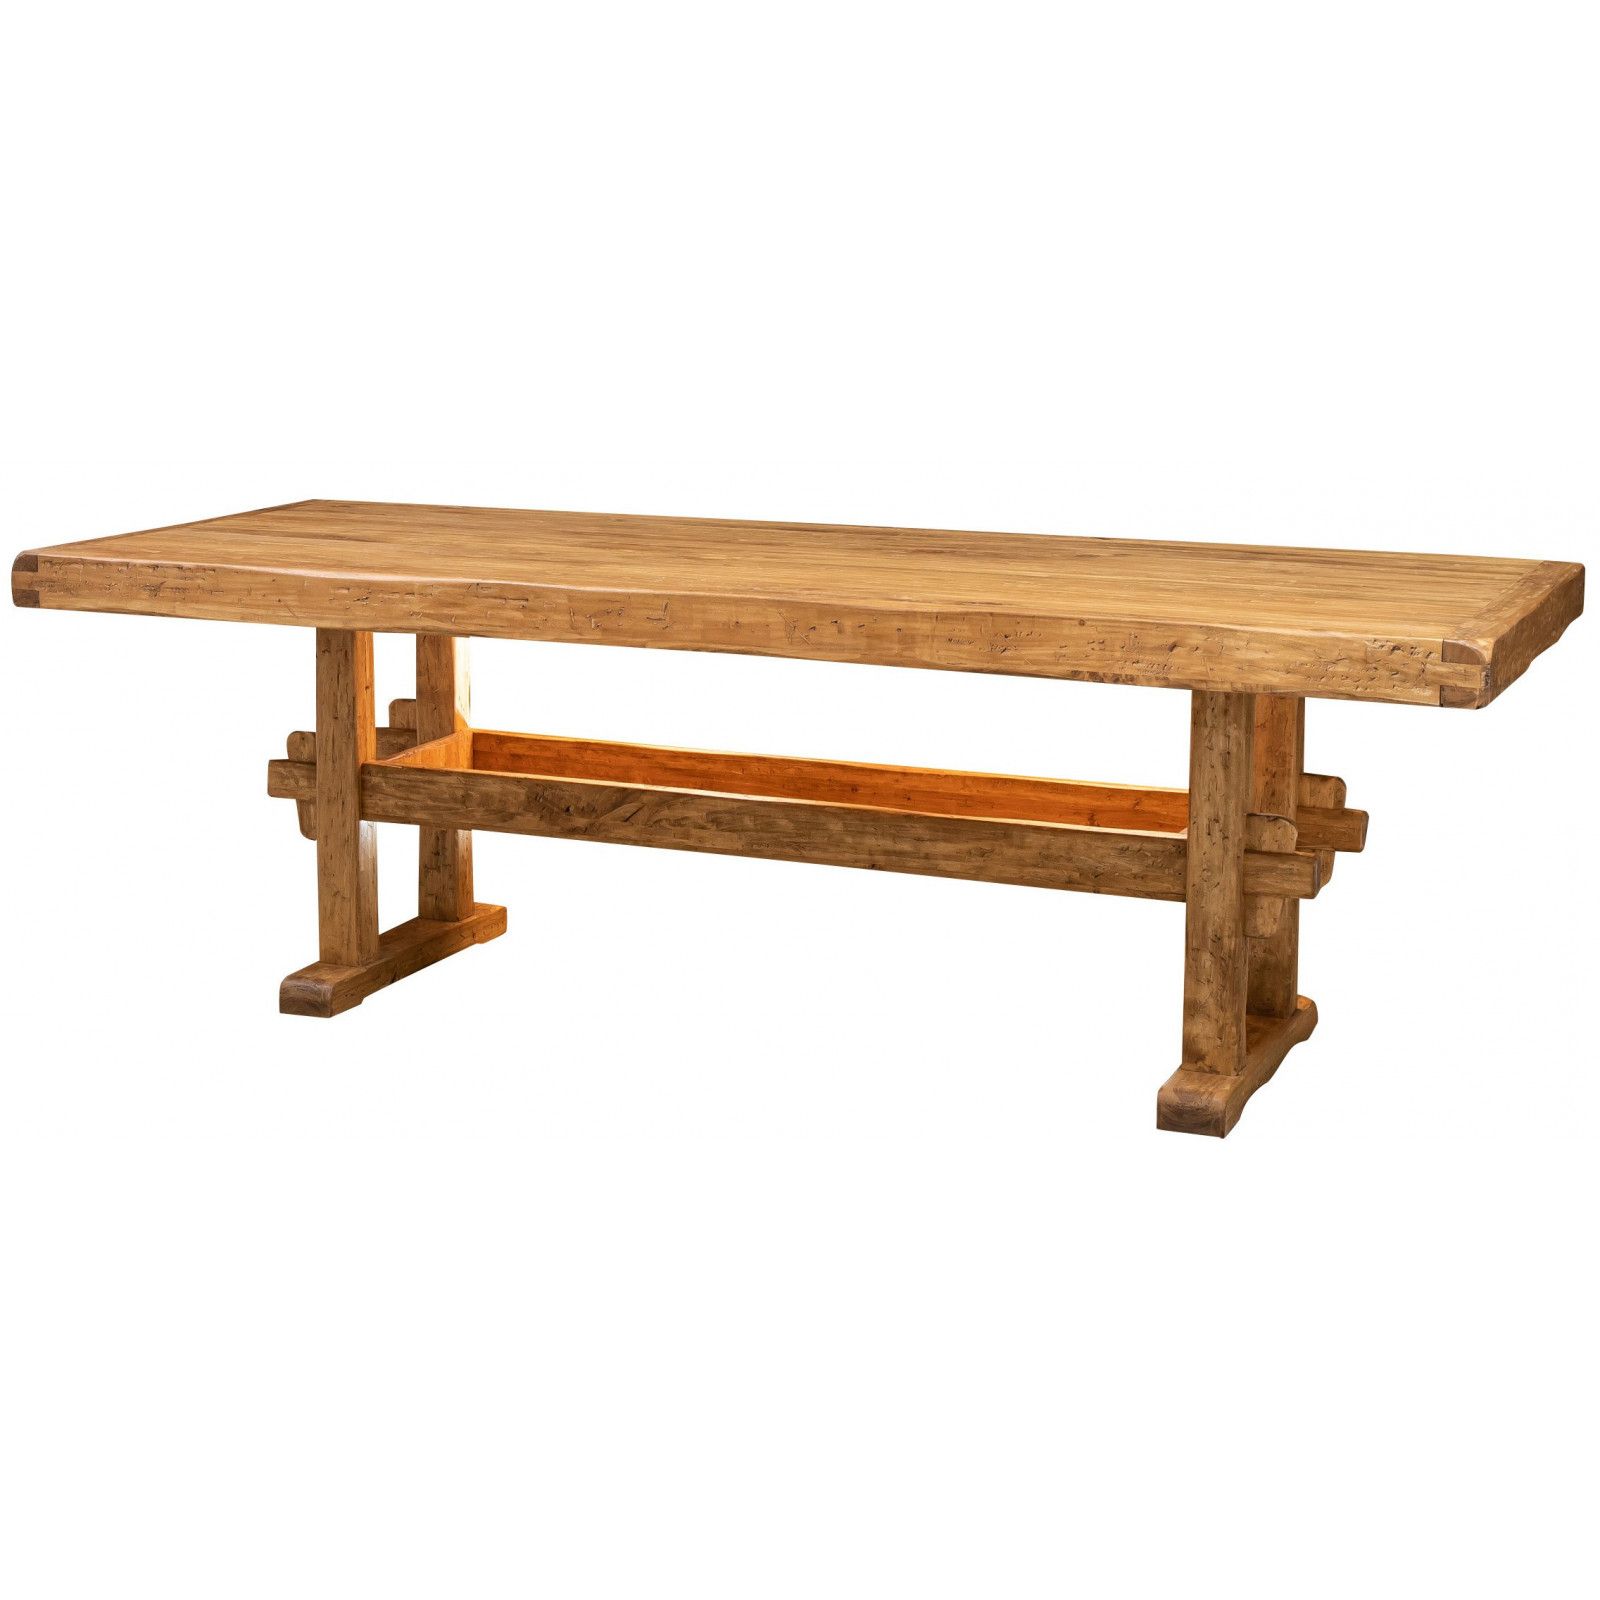 Well Known Rustic Natural Outdoor Tables Pertaining To Rustic Table In Solid Wood Of Tiglio Natural Finish (View 1 of 15)